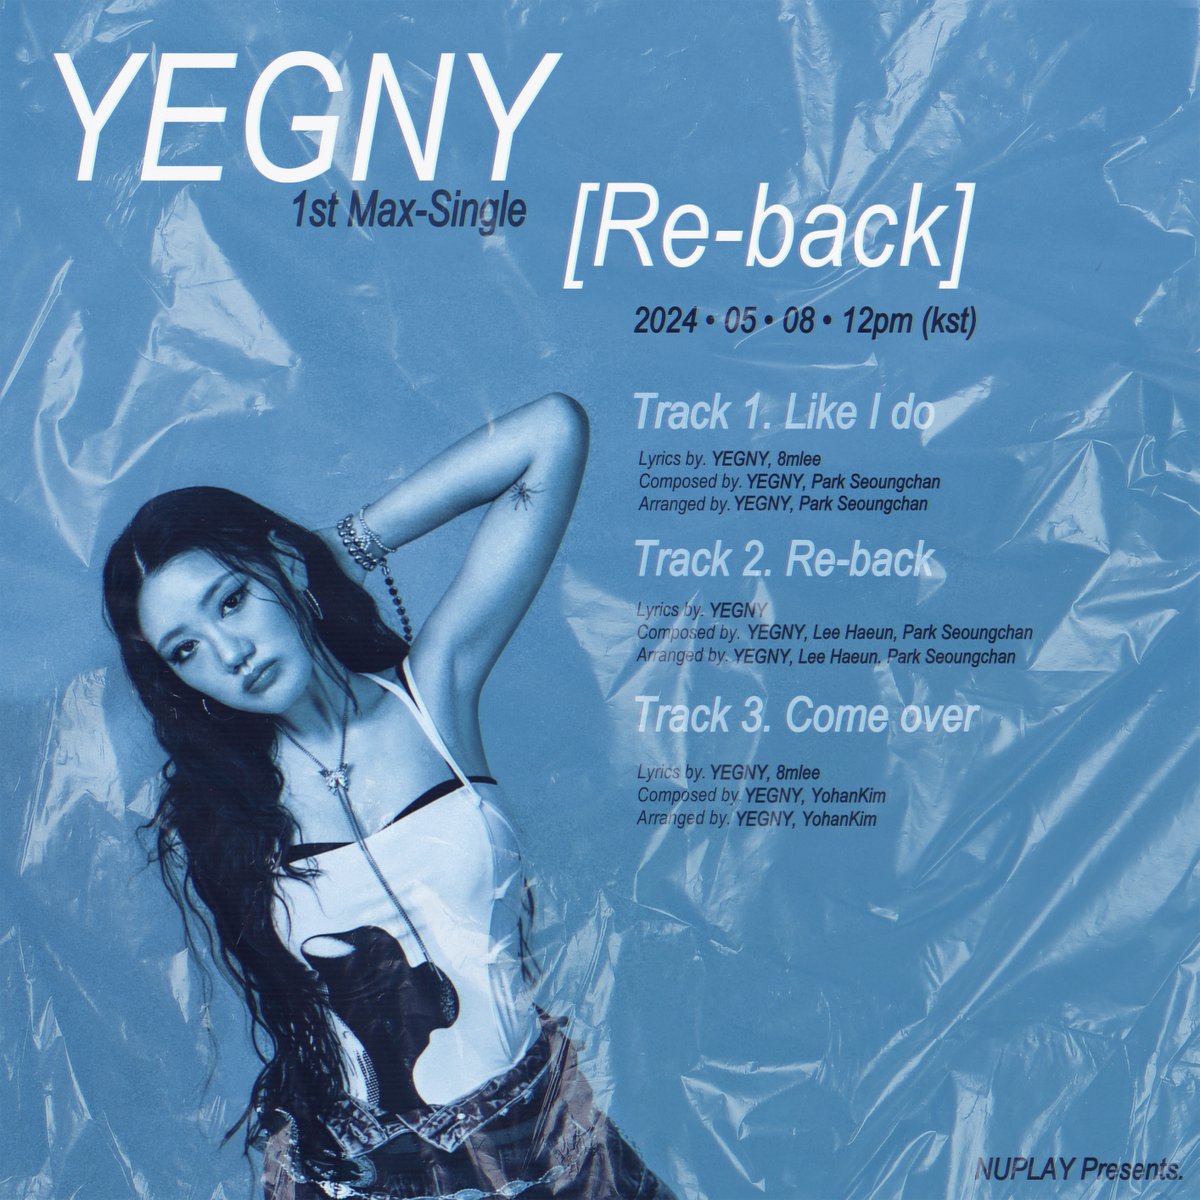 YEGNY - Max Single [Re-back]
2024.05.08.12PM(KST)

Track 1. Like I do
Track 2. Re-back
Track 3. Come over

#YEGNY #최예근 #Re_back #LikeIdo #Comeover #NUPLAY #누플레이 #PanEntertainment